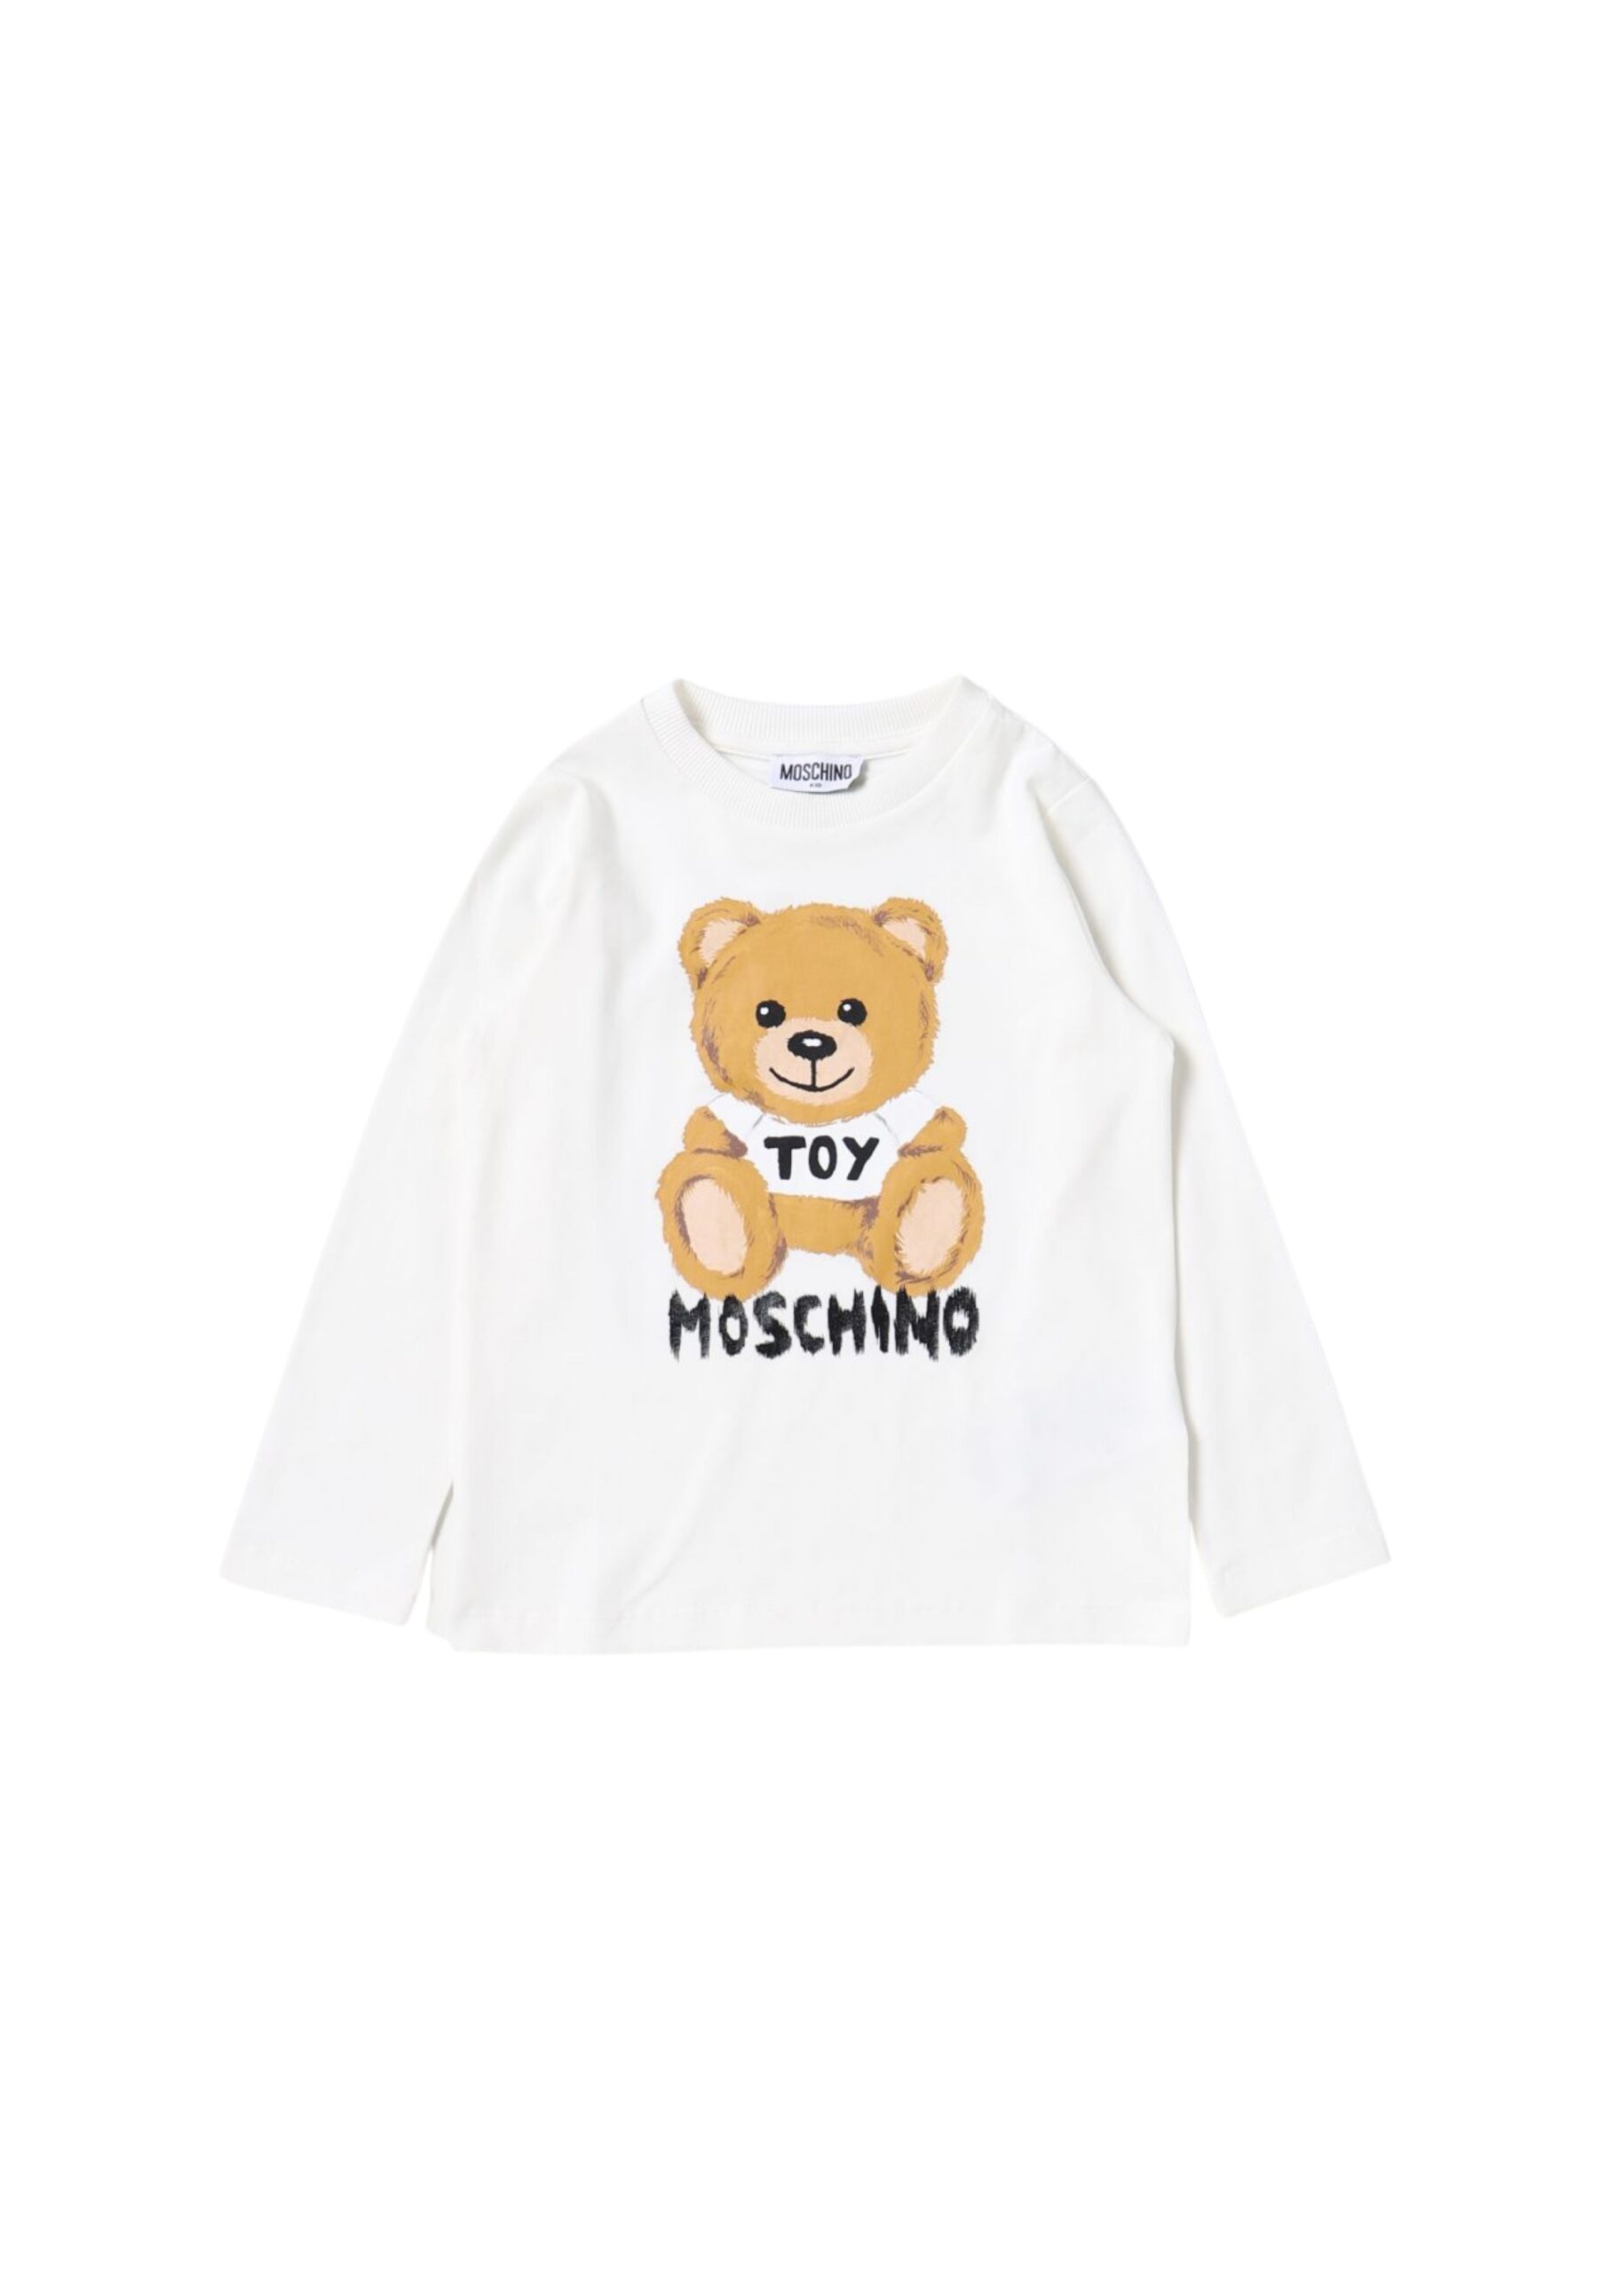 Featured image for “Moschino T-shirt Stampa Teddy Toy”